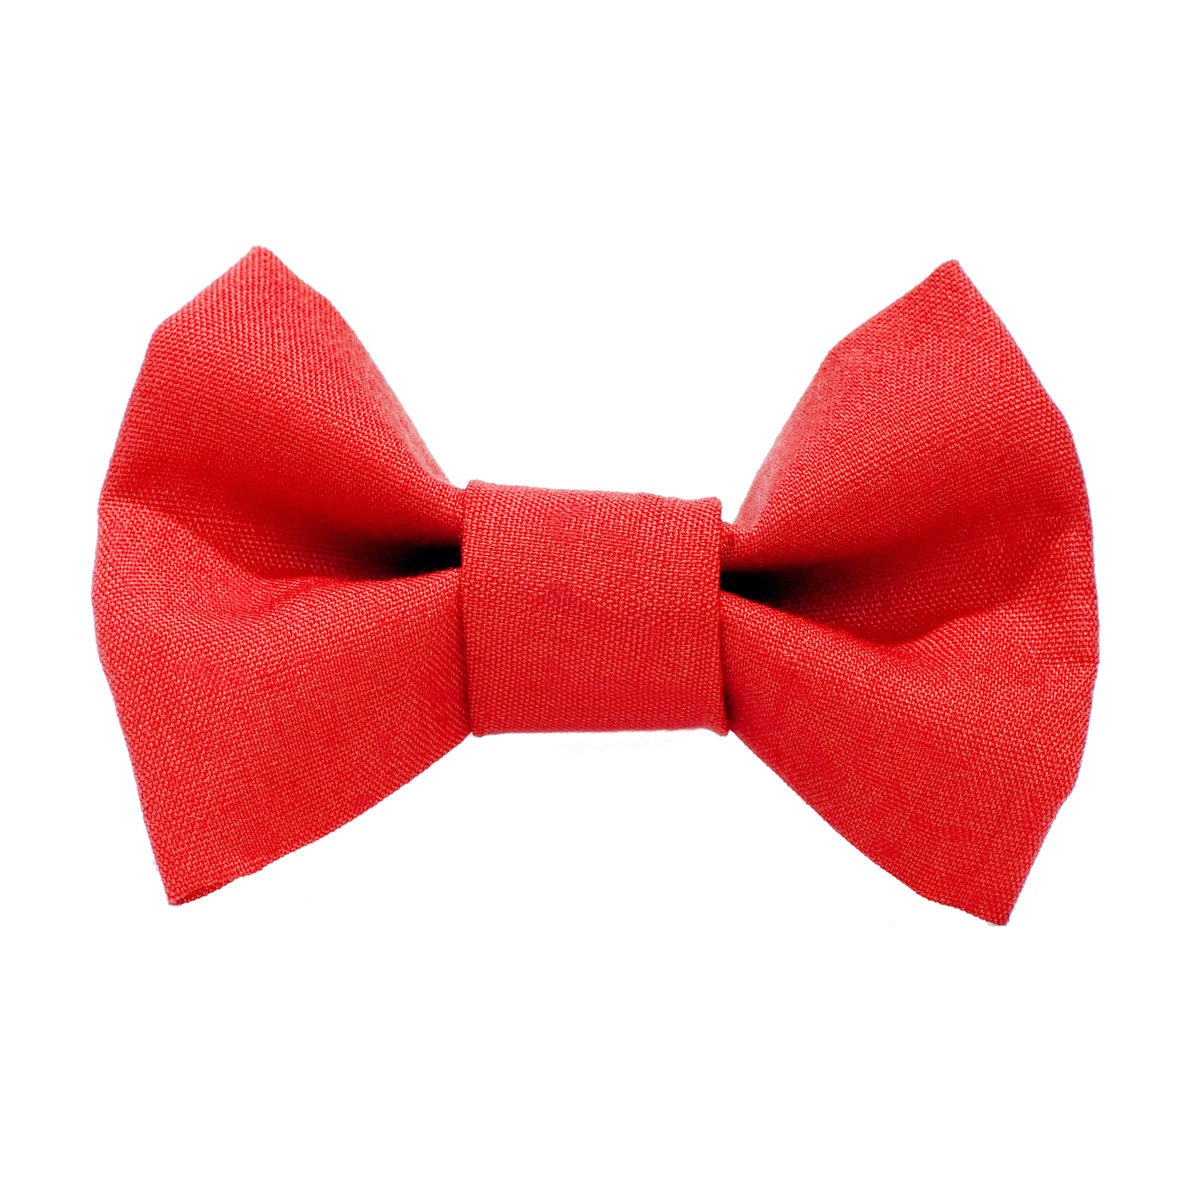 The Boss Is In -  Red Cat Bow Tie